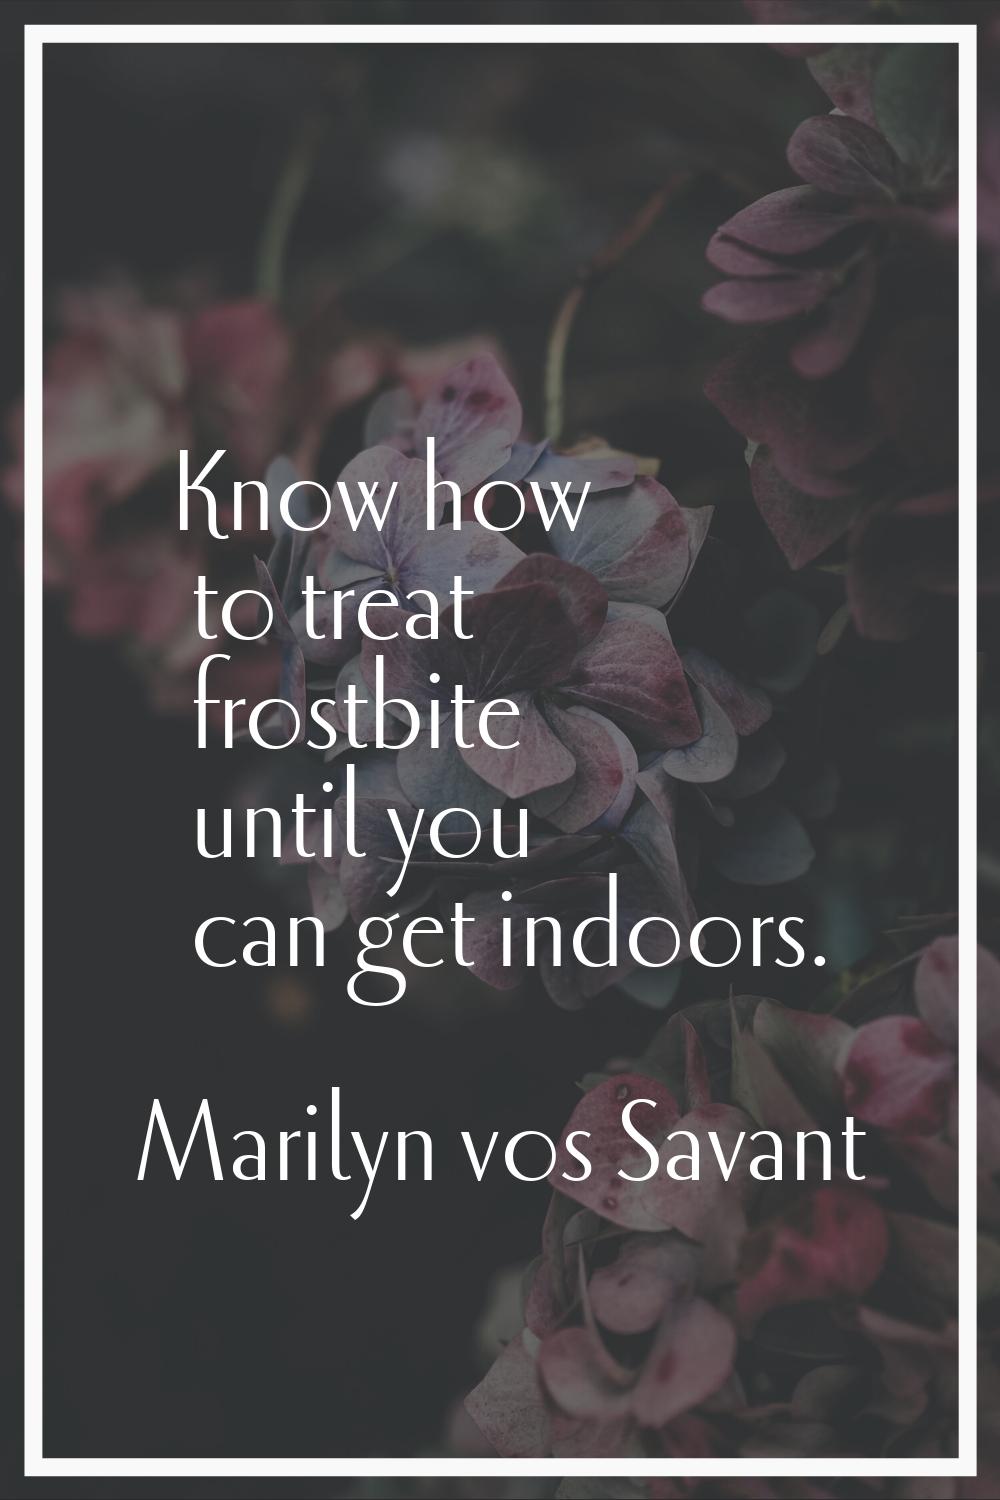 Know how to treat frostbite until you can get indoors.